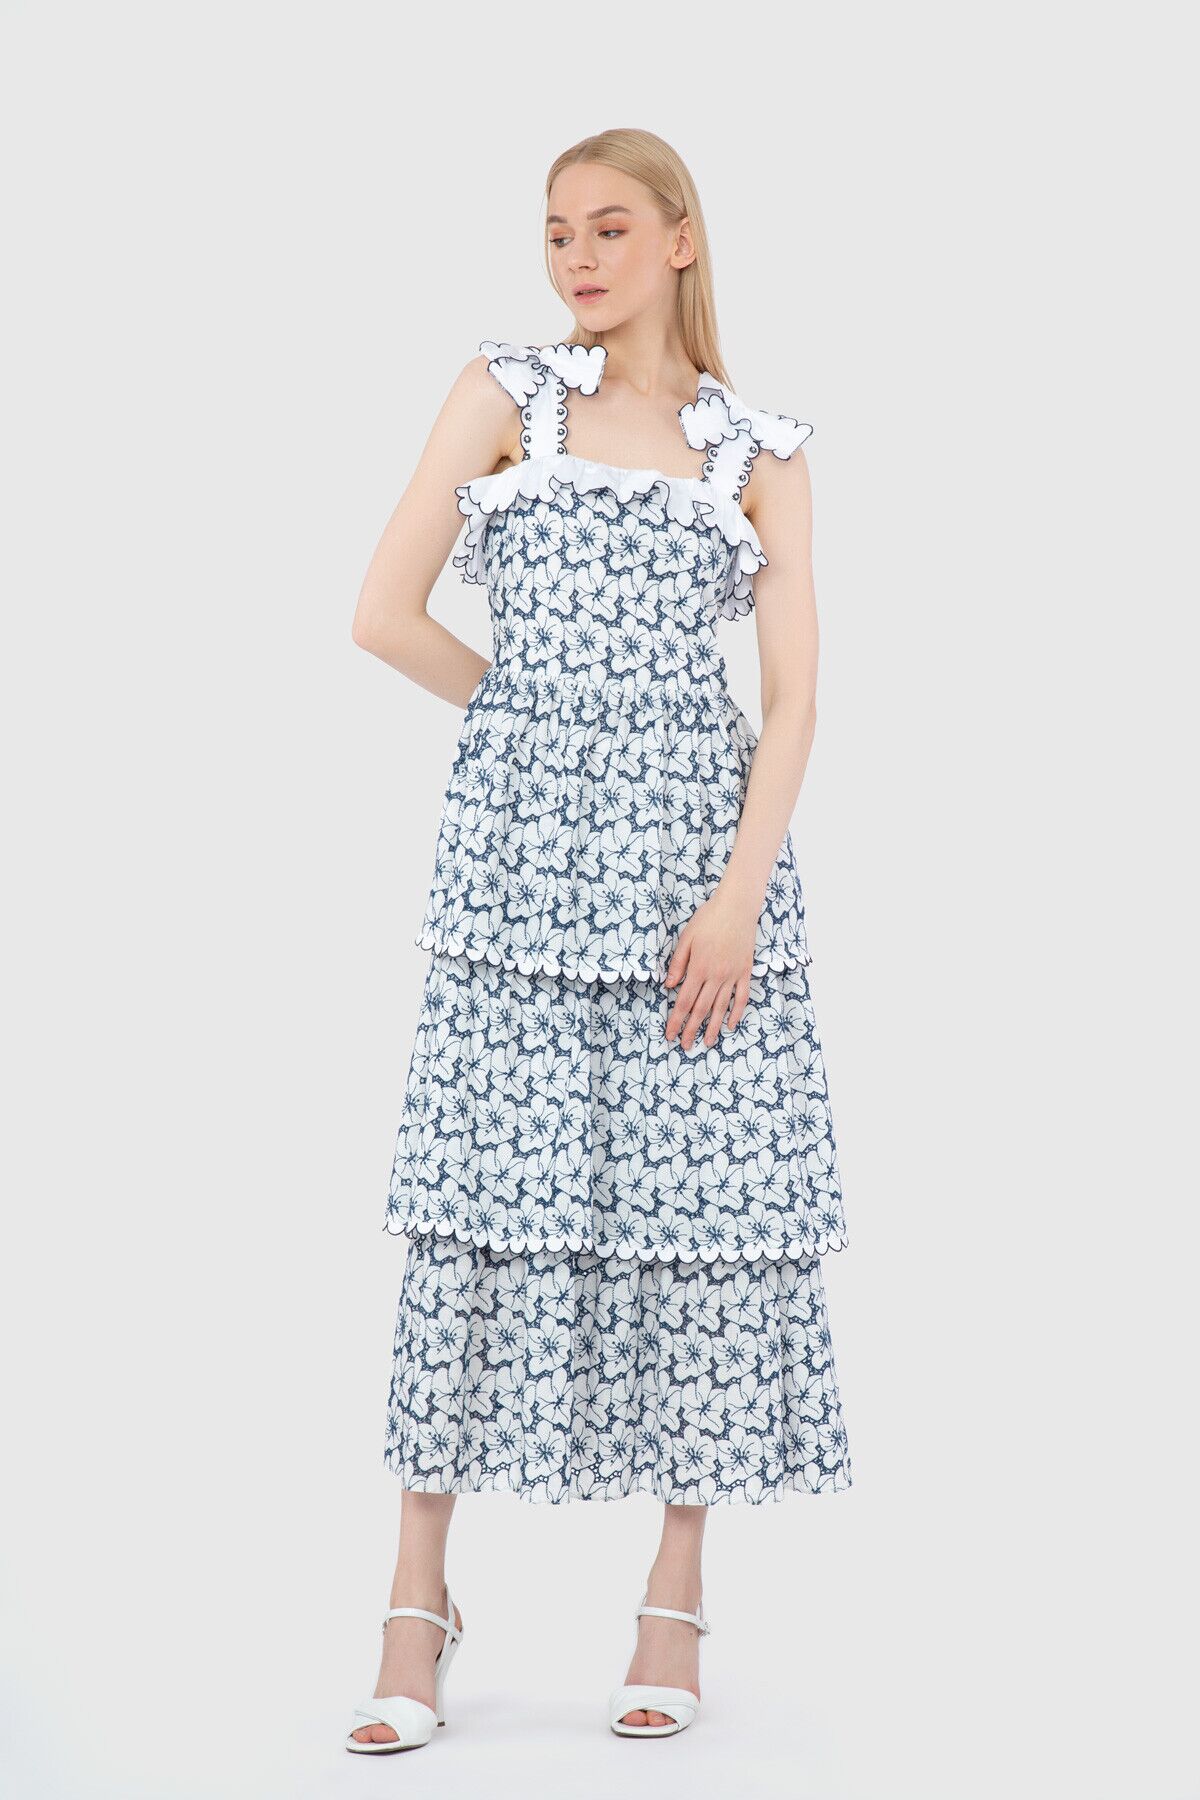 GIZIA - Embroidered Detailed Ankle Length Blue Dress